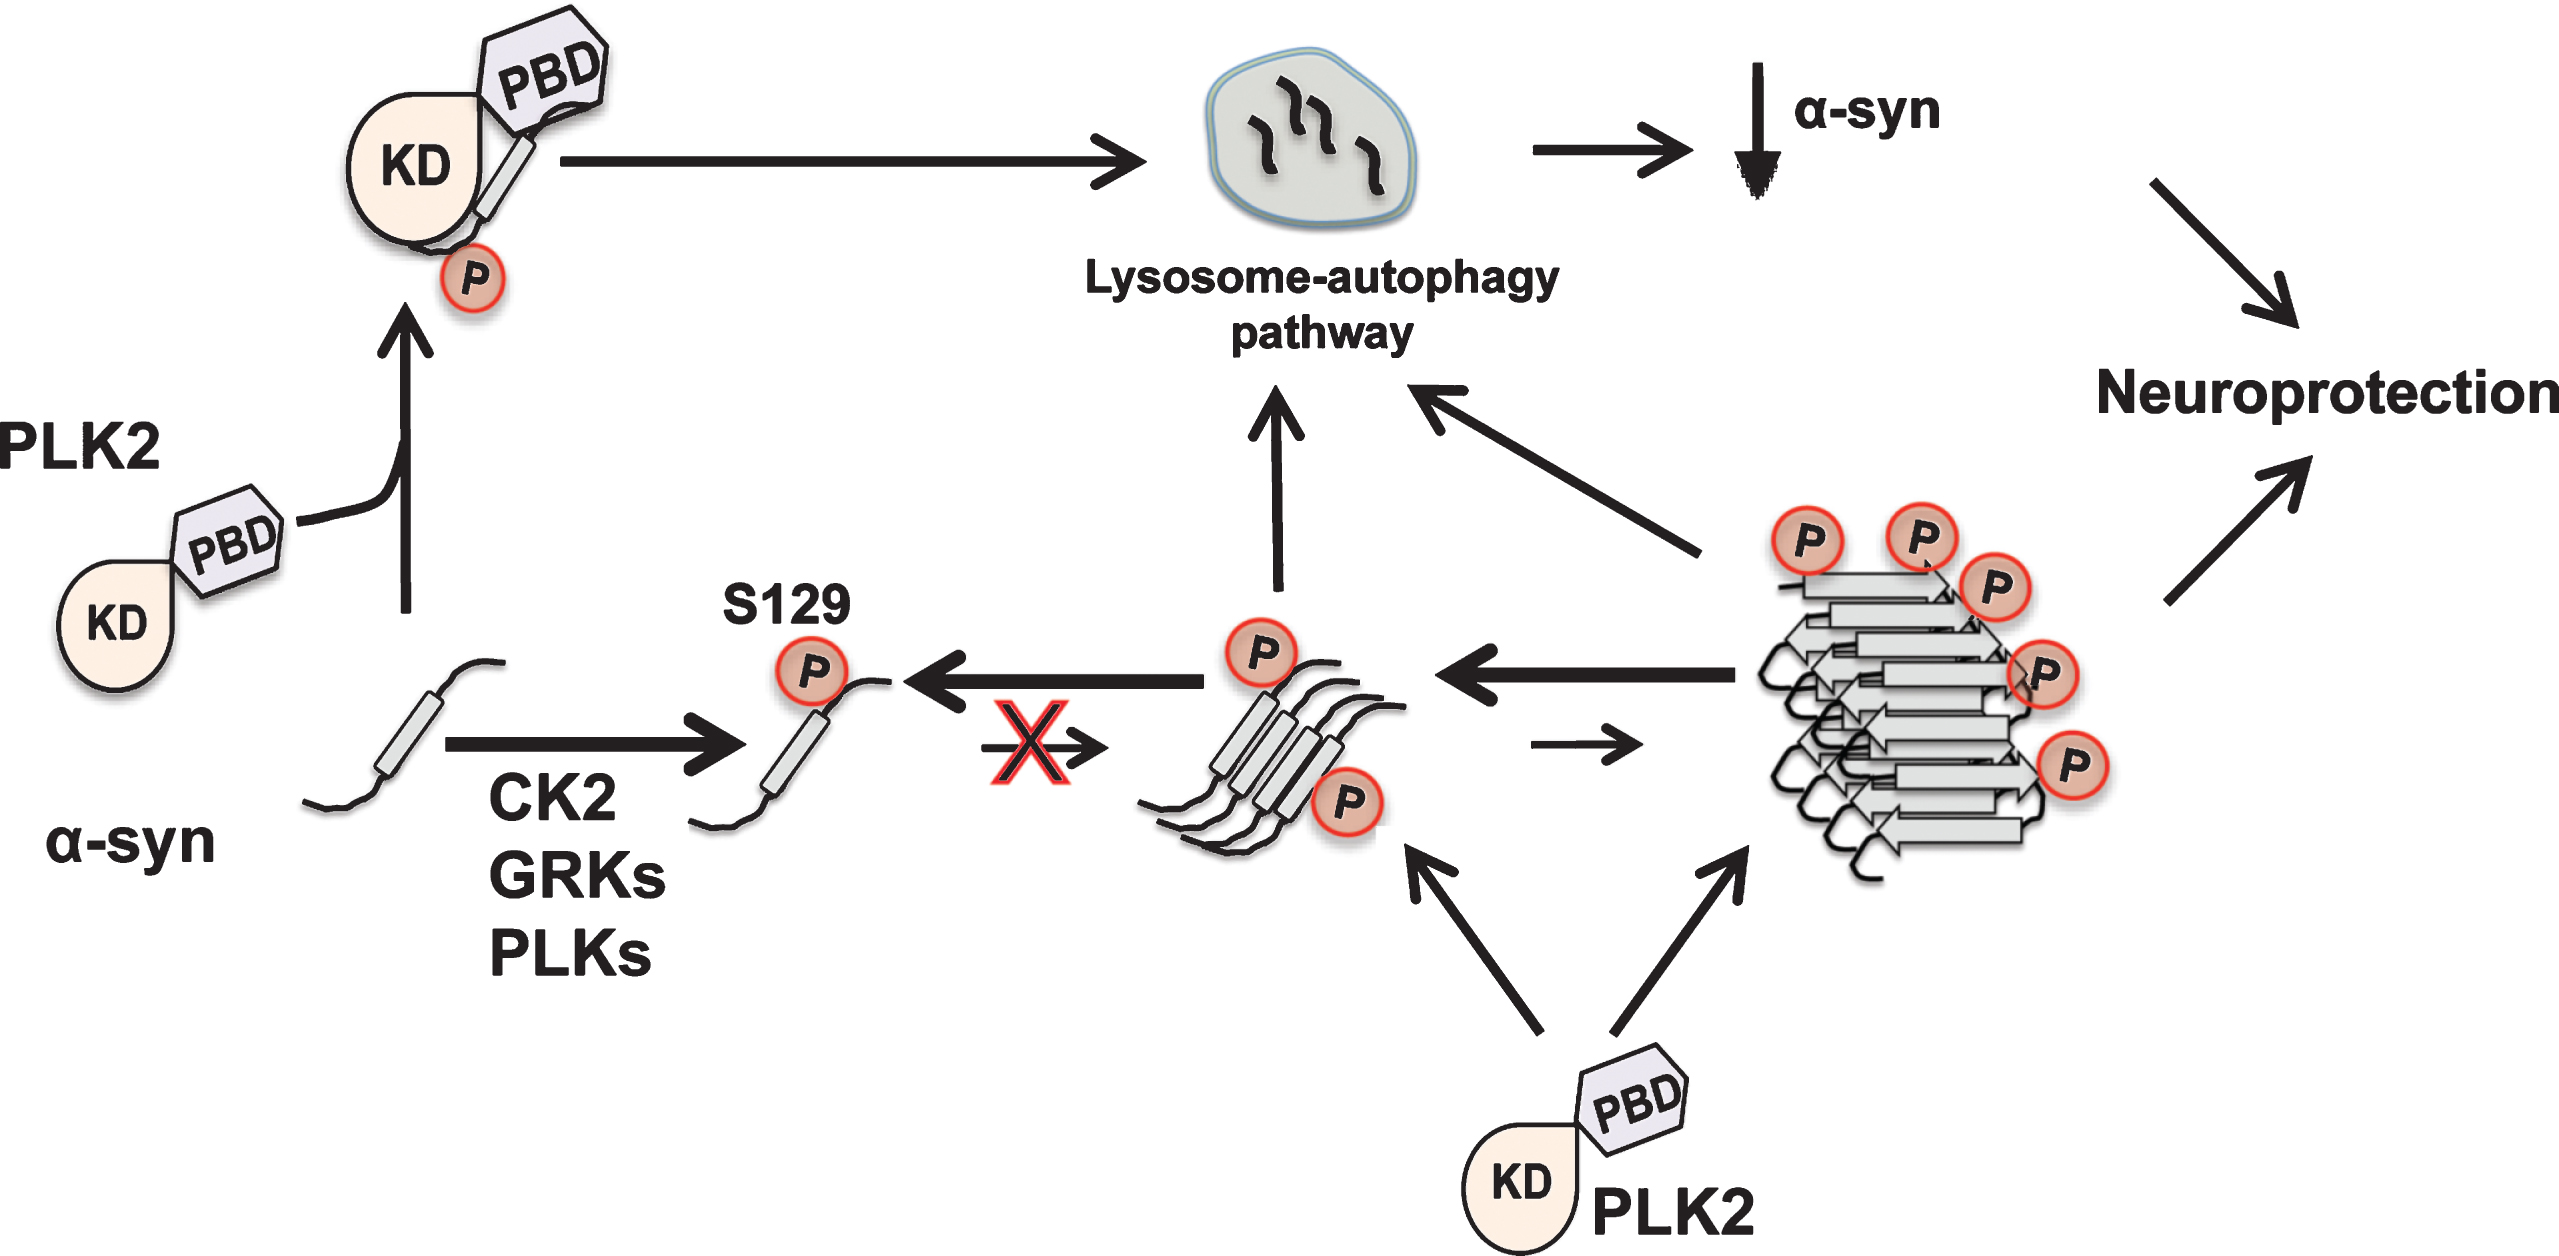 Potential role of phosphorylation at S129 in the regulation of α-syn clearance, aggregation and toxicity. Converging lines of evidence supports the implication of pS129 in the regulation of α-syn turnover. In our recent report we showed that PLK2 phosphorylates, interacts with and enhances α-syn clearance via the lysosome-autophagy degradation pathway [70], thereby it suppresses its toxicity in vivo. In another hand, in vitro assays revealed that authentic phosphorylation at S129, inhibits α-syn fibrillogenesis [42], suggesting that this post-translational modification may reduce α-syn fibrillogenesis and aggregation-related toxicity. Finally, α-syn oligomers and fibrils are good substrates for several kinases, notably PLK2 [116], suggesting that this event could occur after LBs formation. It is plausible that S129 phosphorylation may represent an active process promoting LBs disaggregation and/or clearance. Collectively, these observations suggest that phosphorylation at S129 may play a protective role against α-syn toxicity. PLKs: Polo like kinases, CK2: Casein kinase 2, GRKs: G protein-coupled receptor kinases, KD: Kinase domain, PBD: Polo box domain.